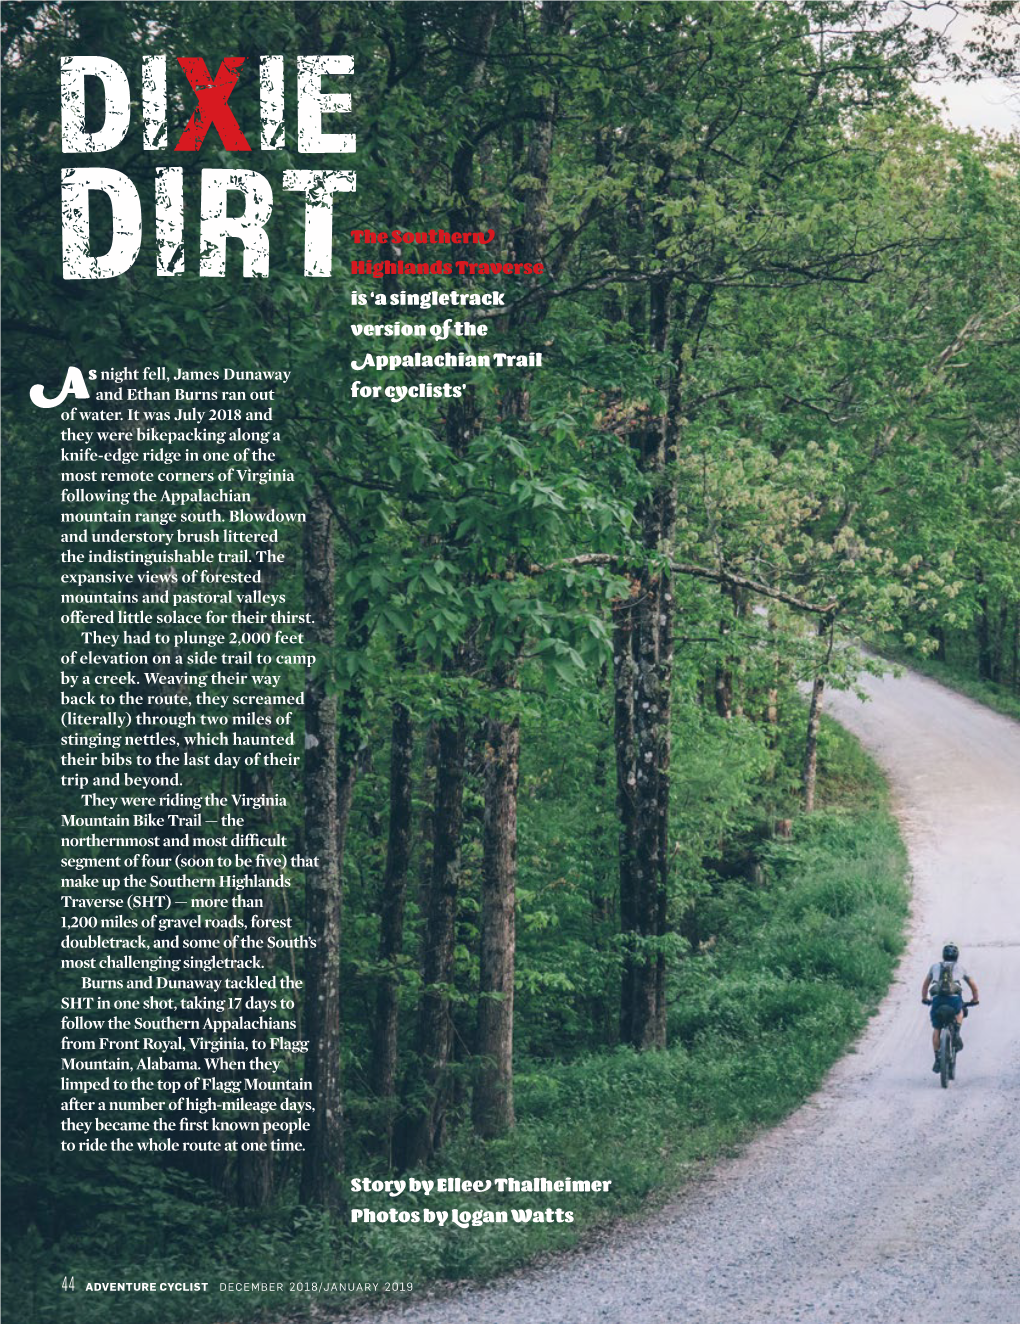 Dirtthe Southern Highlands Traverse Is 'A Singletrack Version of the Appalachian Trail for Cyclists' Story by Ellee Thalhei